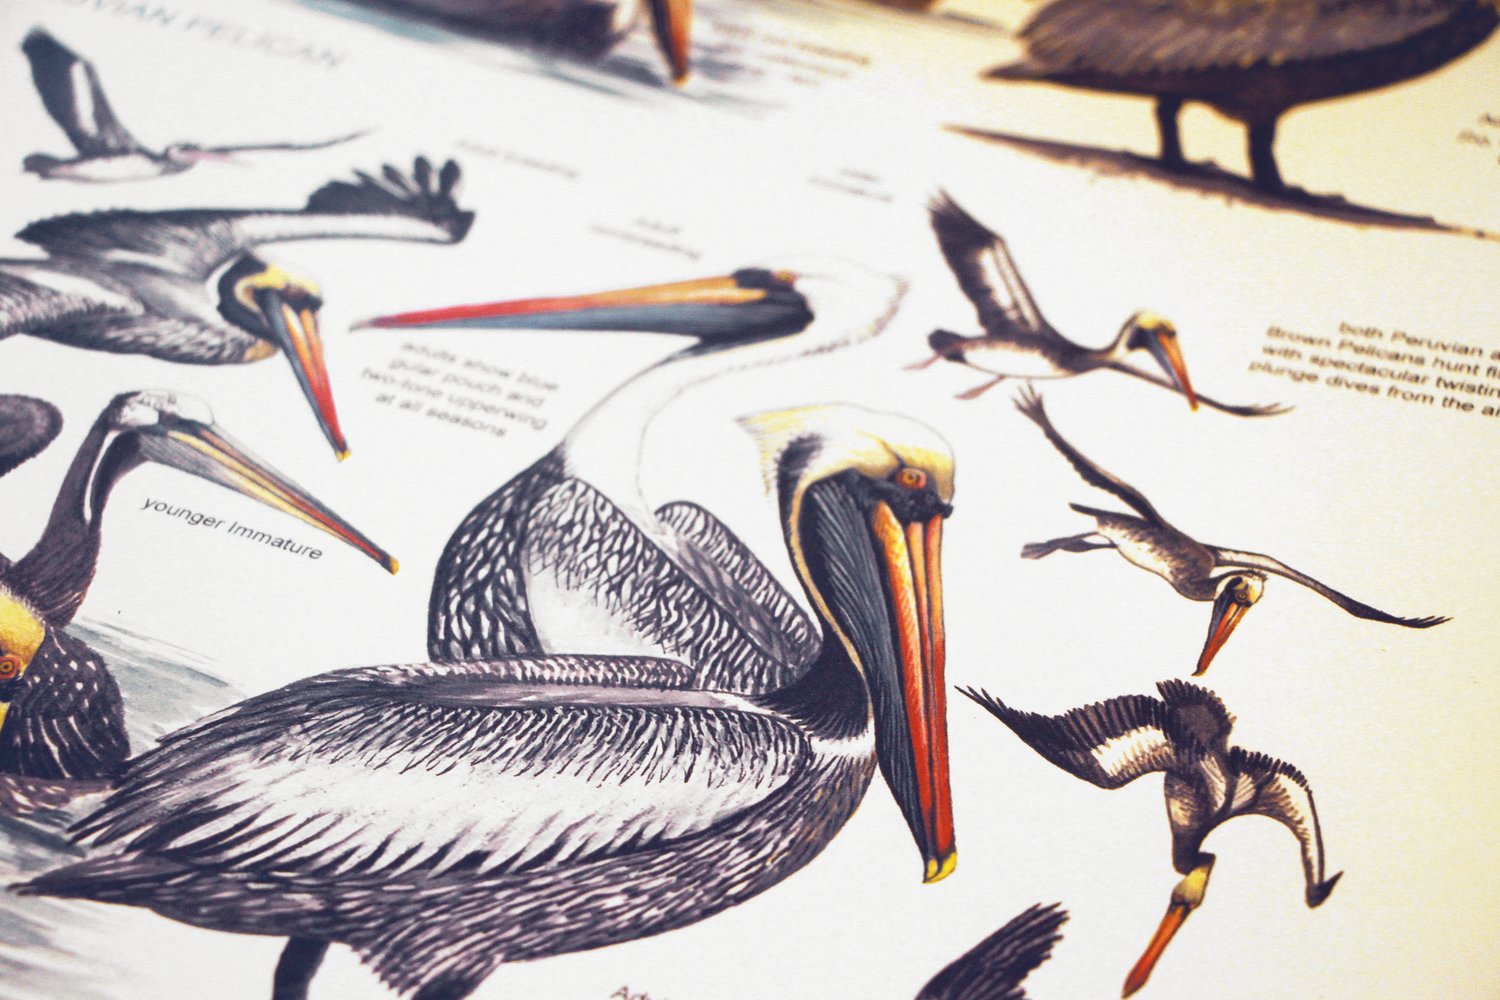 The new book features updated information on seabirds, different 
subspecies, split species, modernized maps and more.